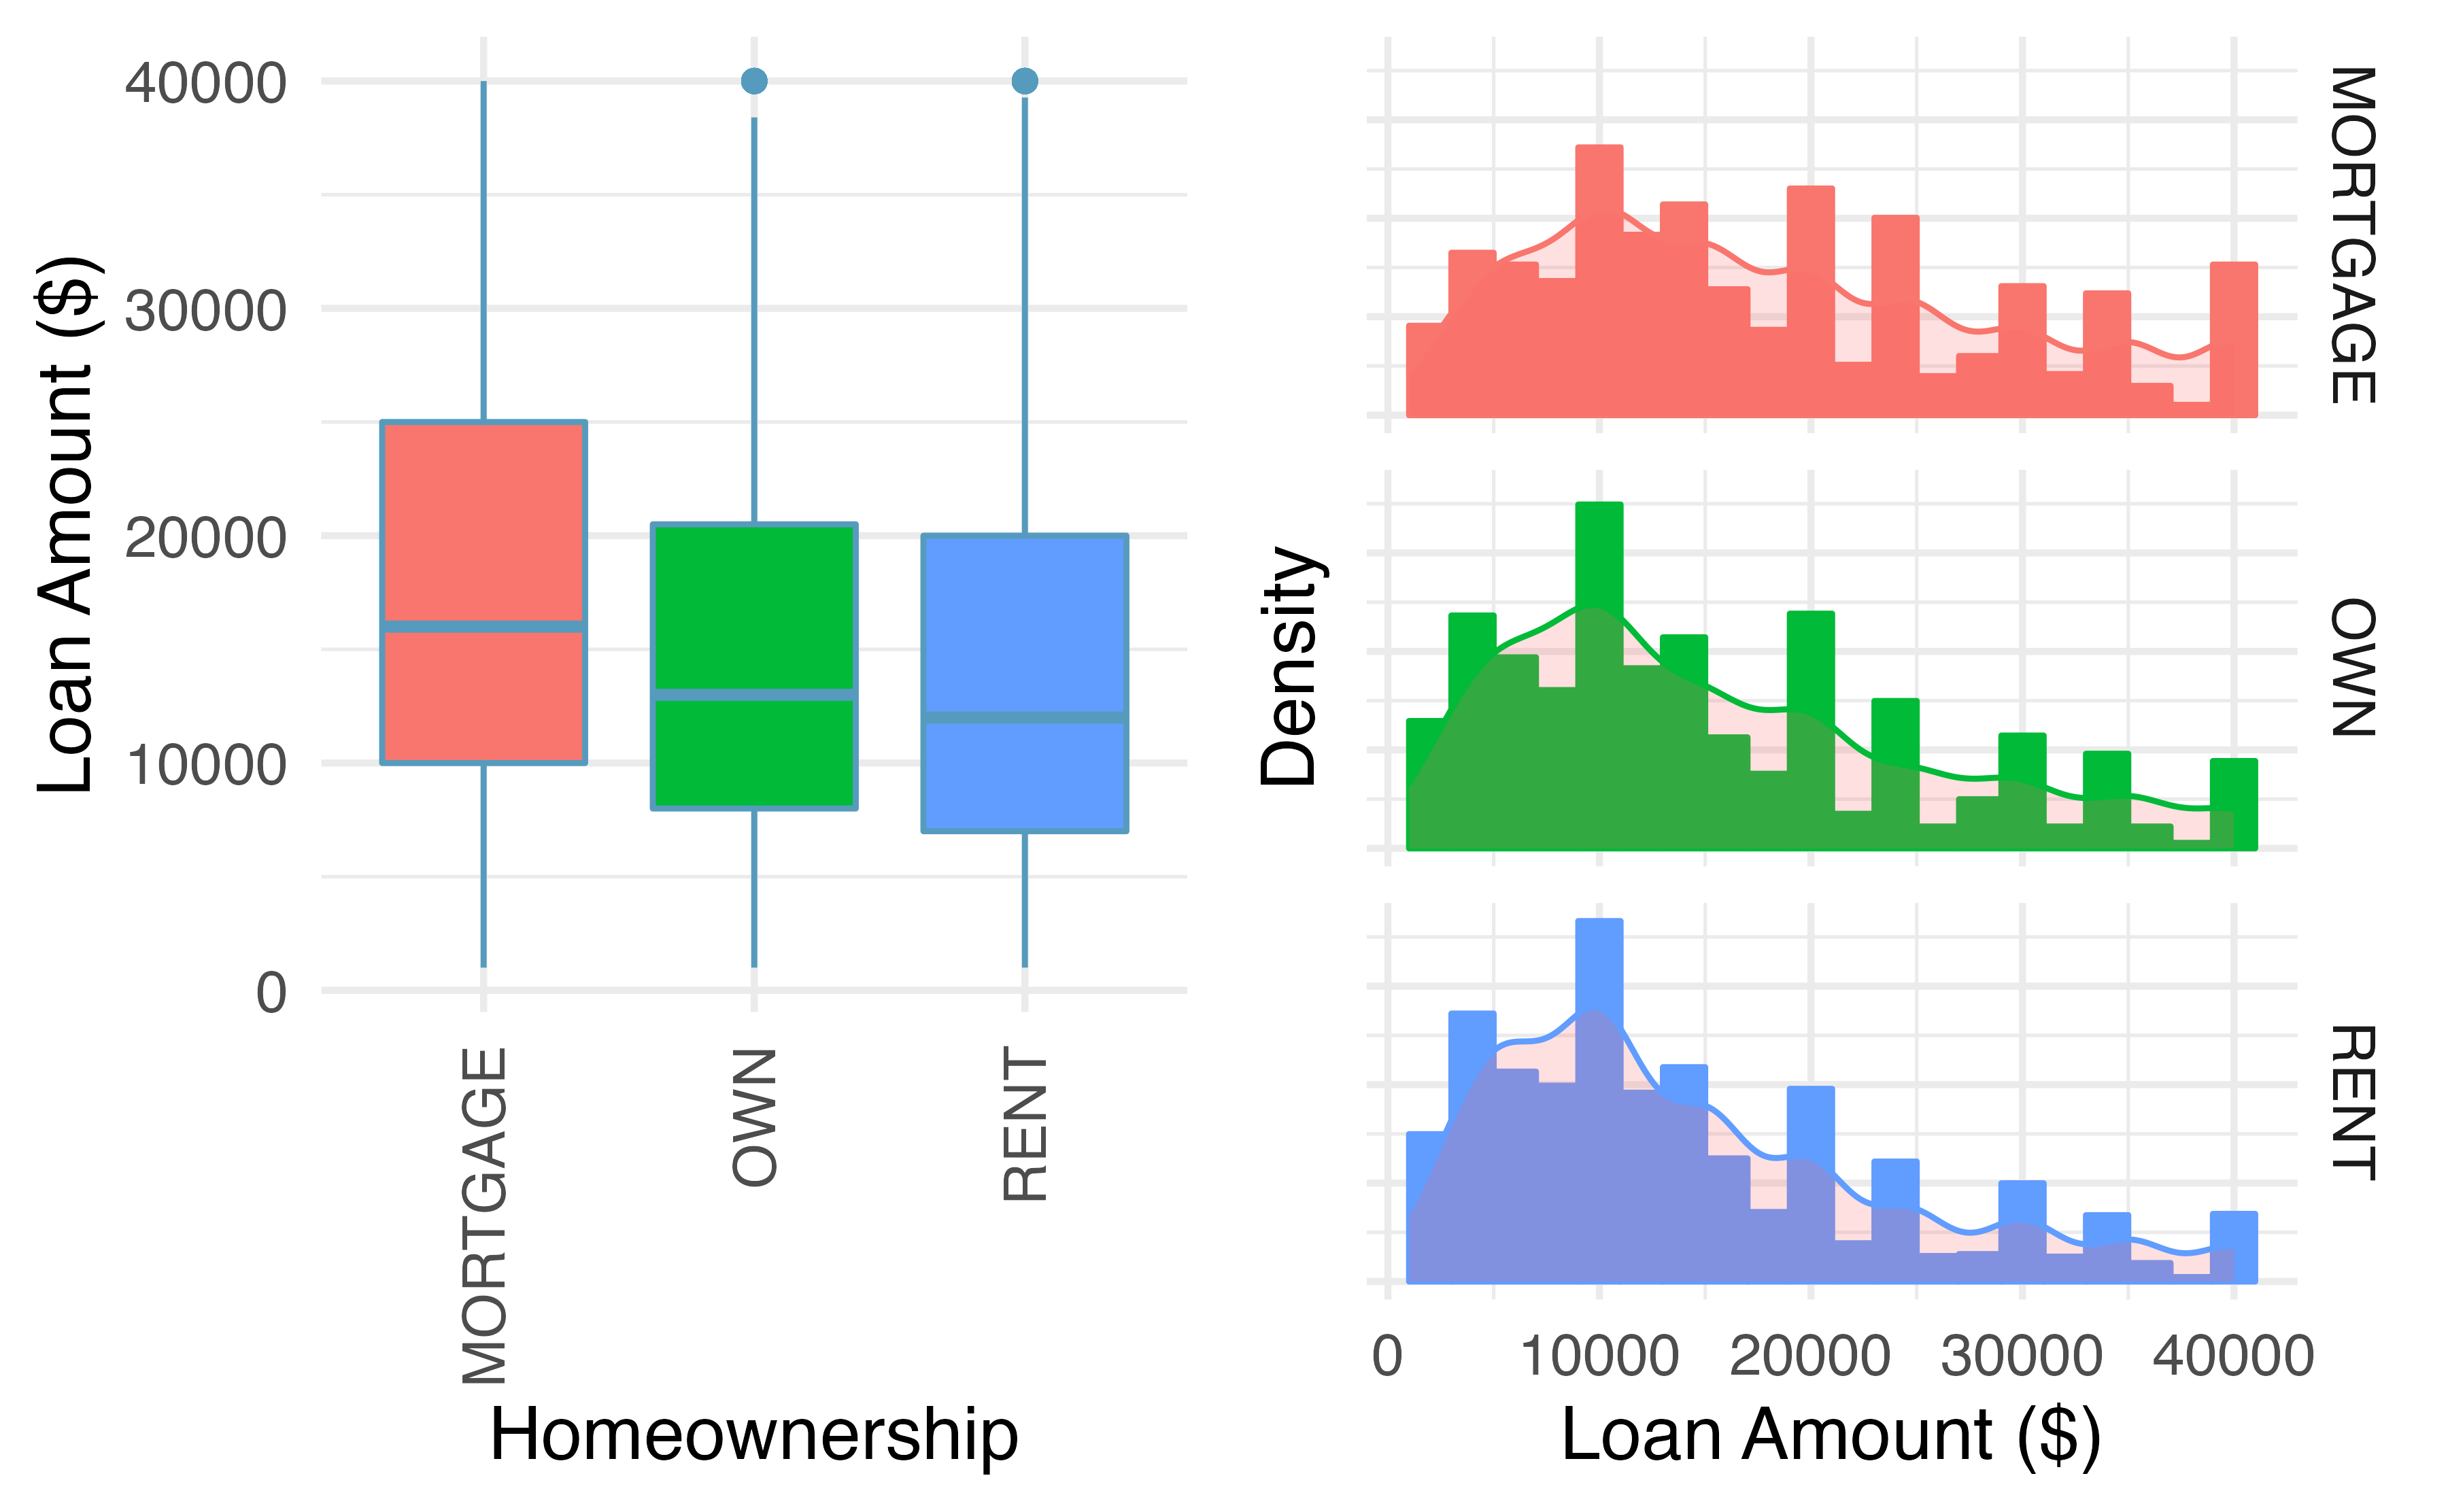 Side-by-side box plots of loan interest rates by homeownership category and corresponding histograms.